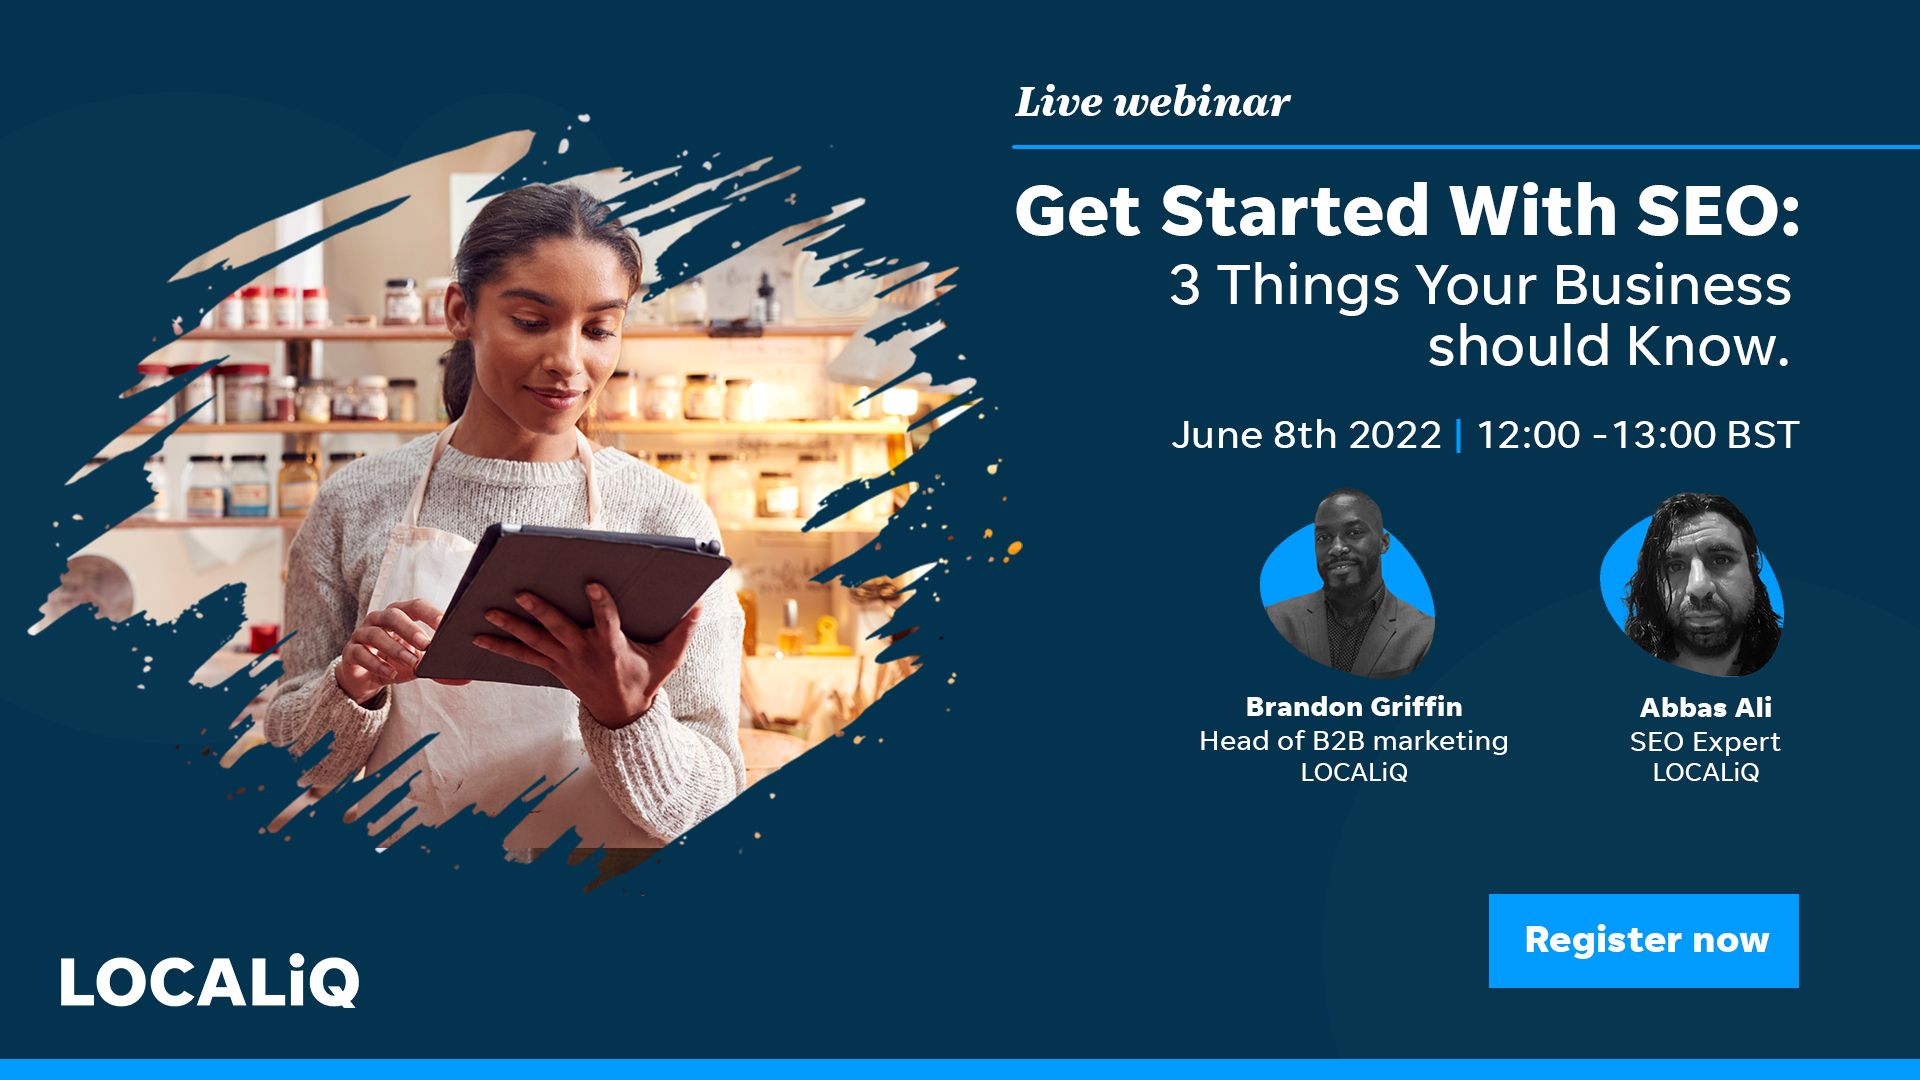 Live Webinar | Get Started With SEO London, Online Event